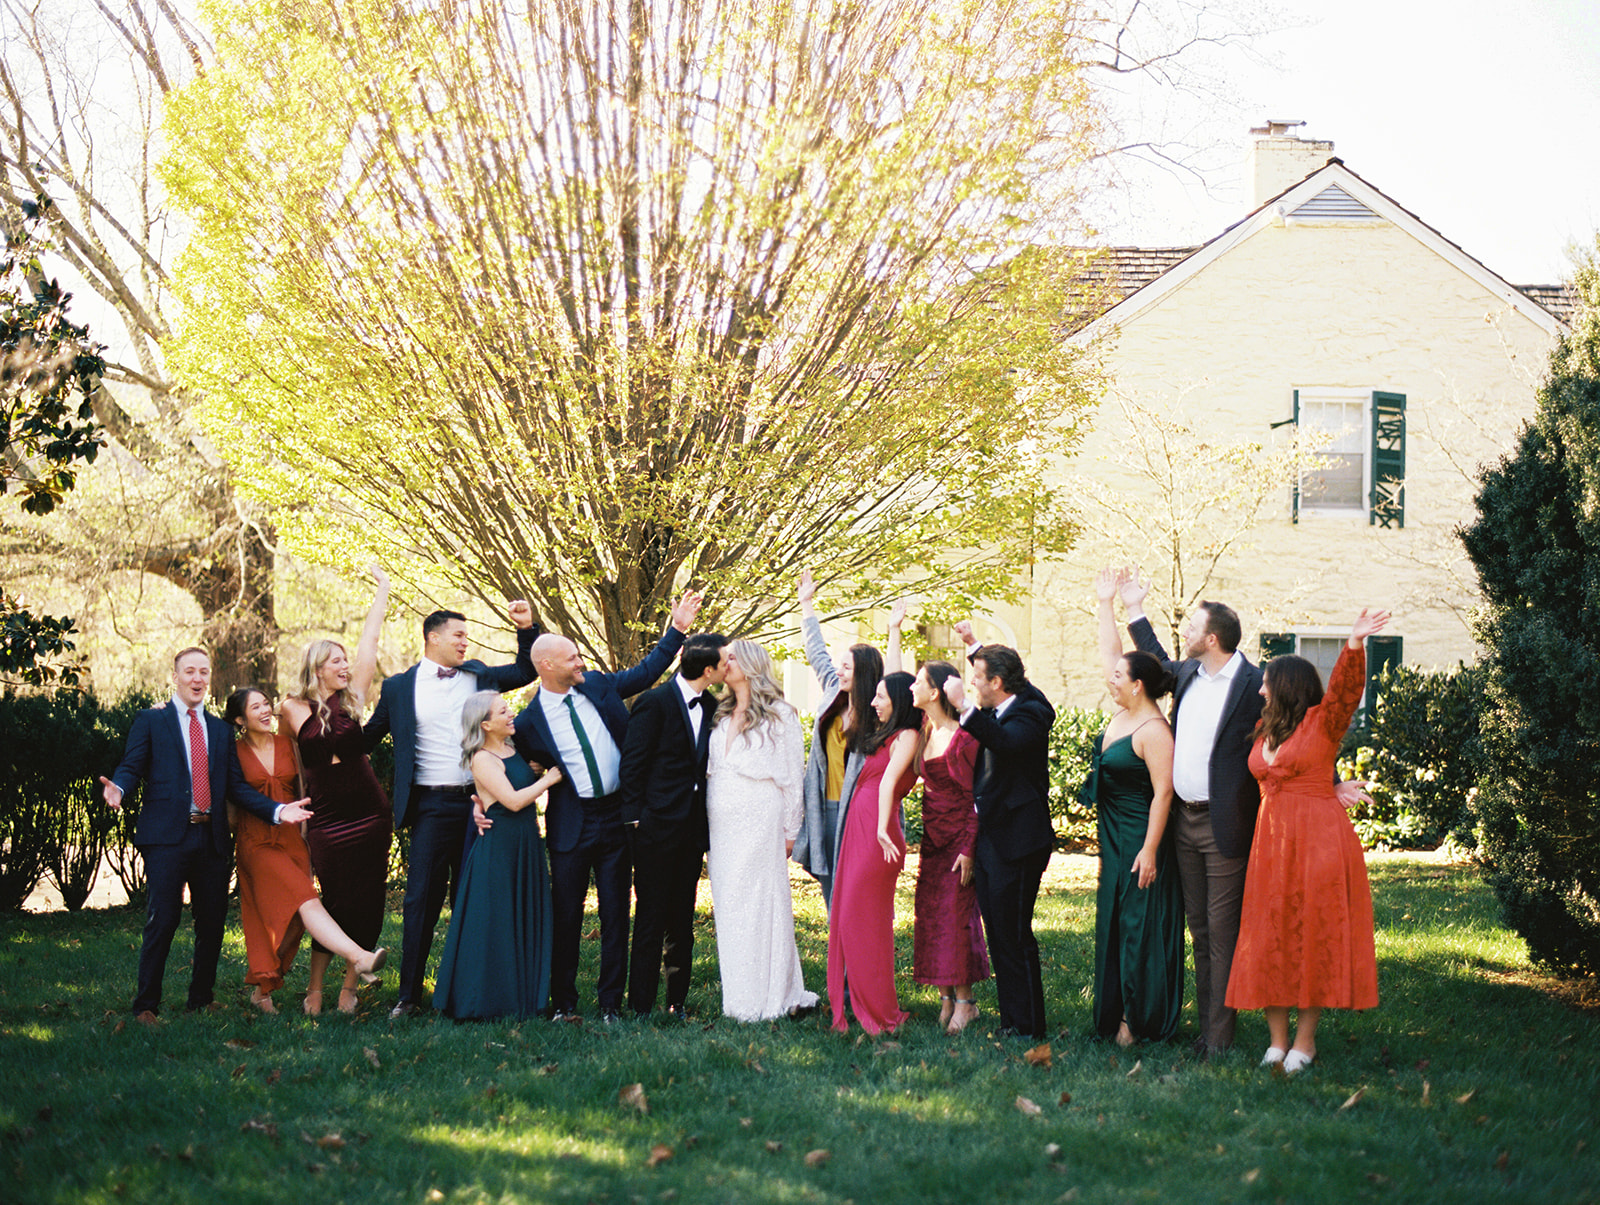 bride and groom kiss groomsmen and bridesmaids pictures post ceremony pictures  elegant wedding pictures